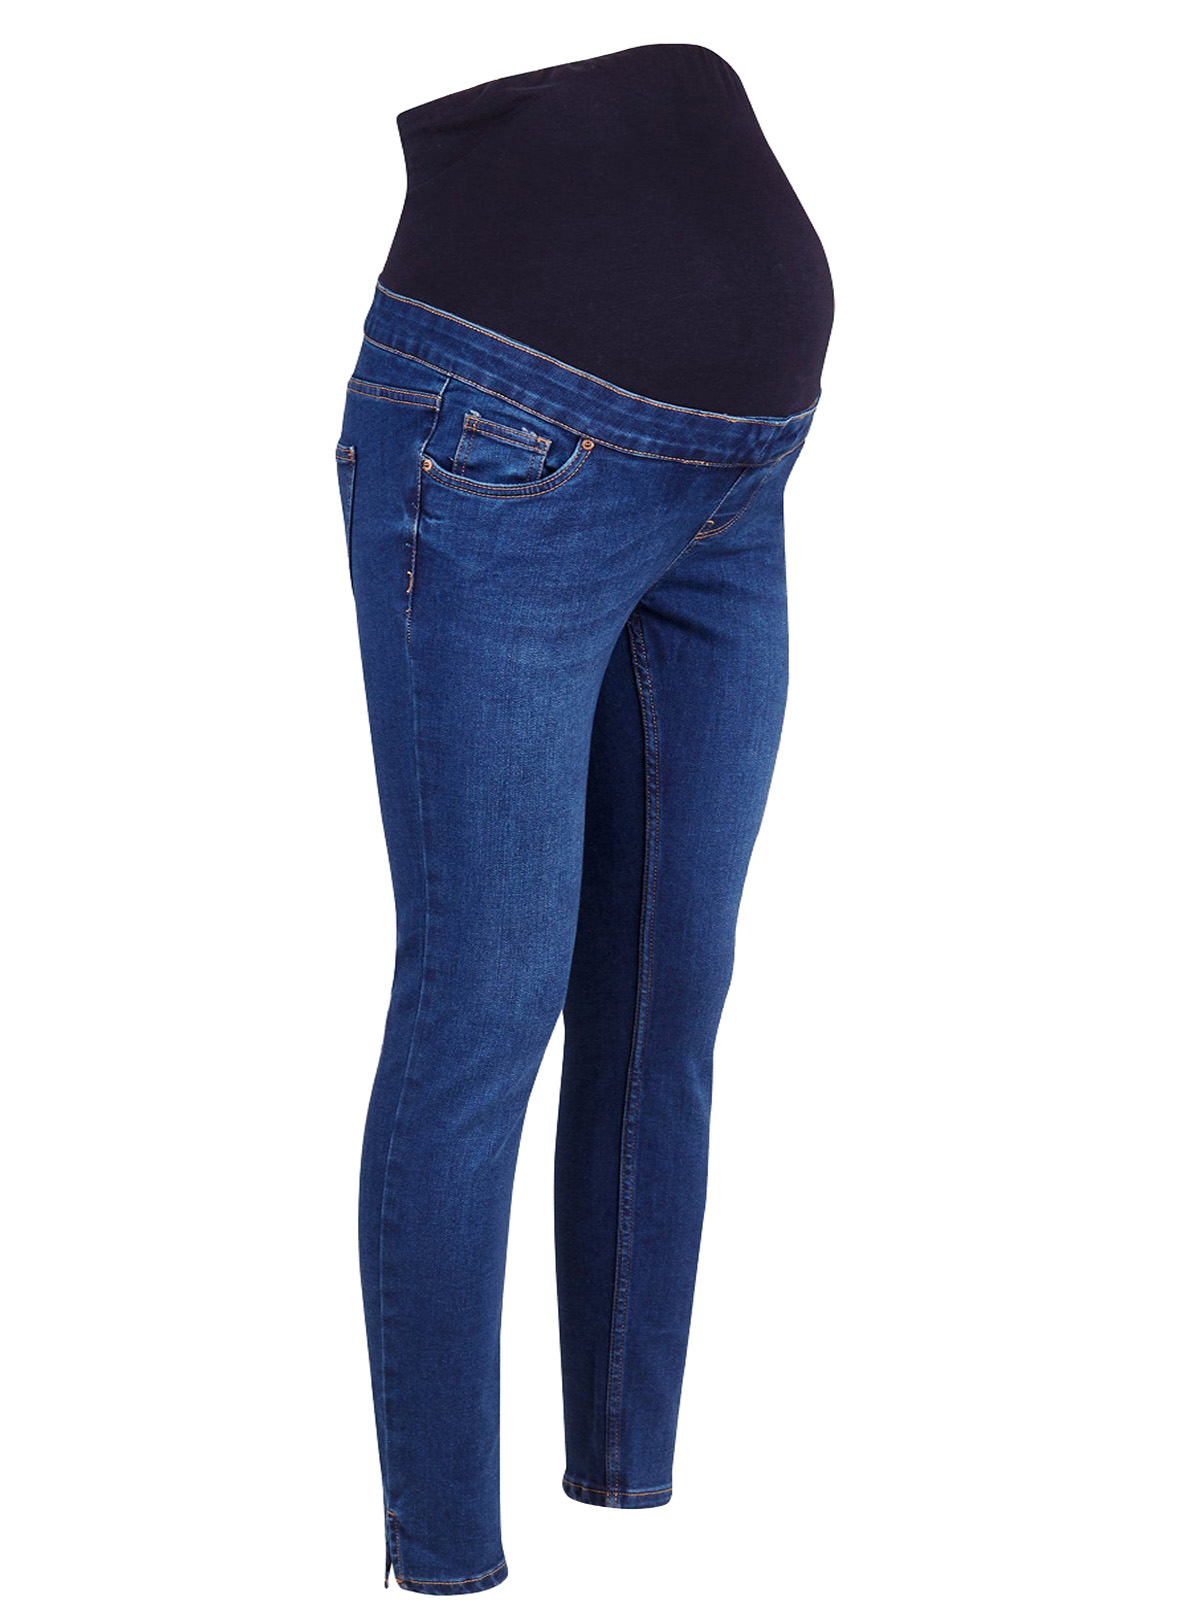 N3W L00K BLUE-RINSE Jenna Maternity Over Bump Jeans - Size 8 to 12 ...